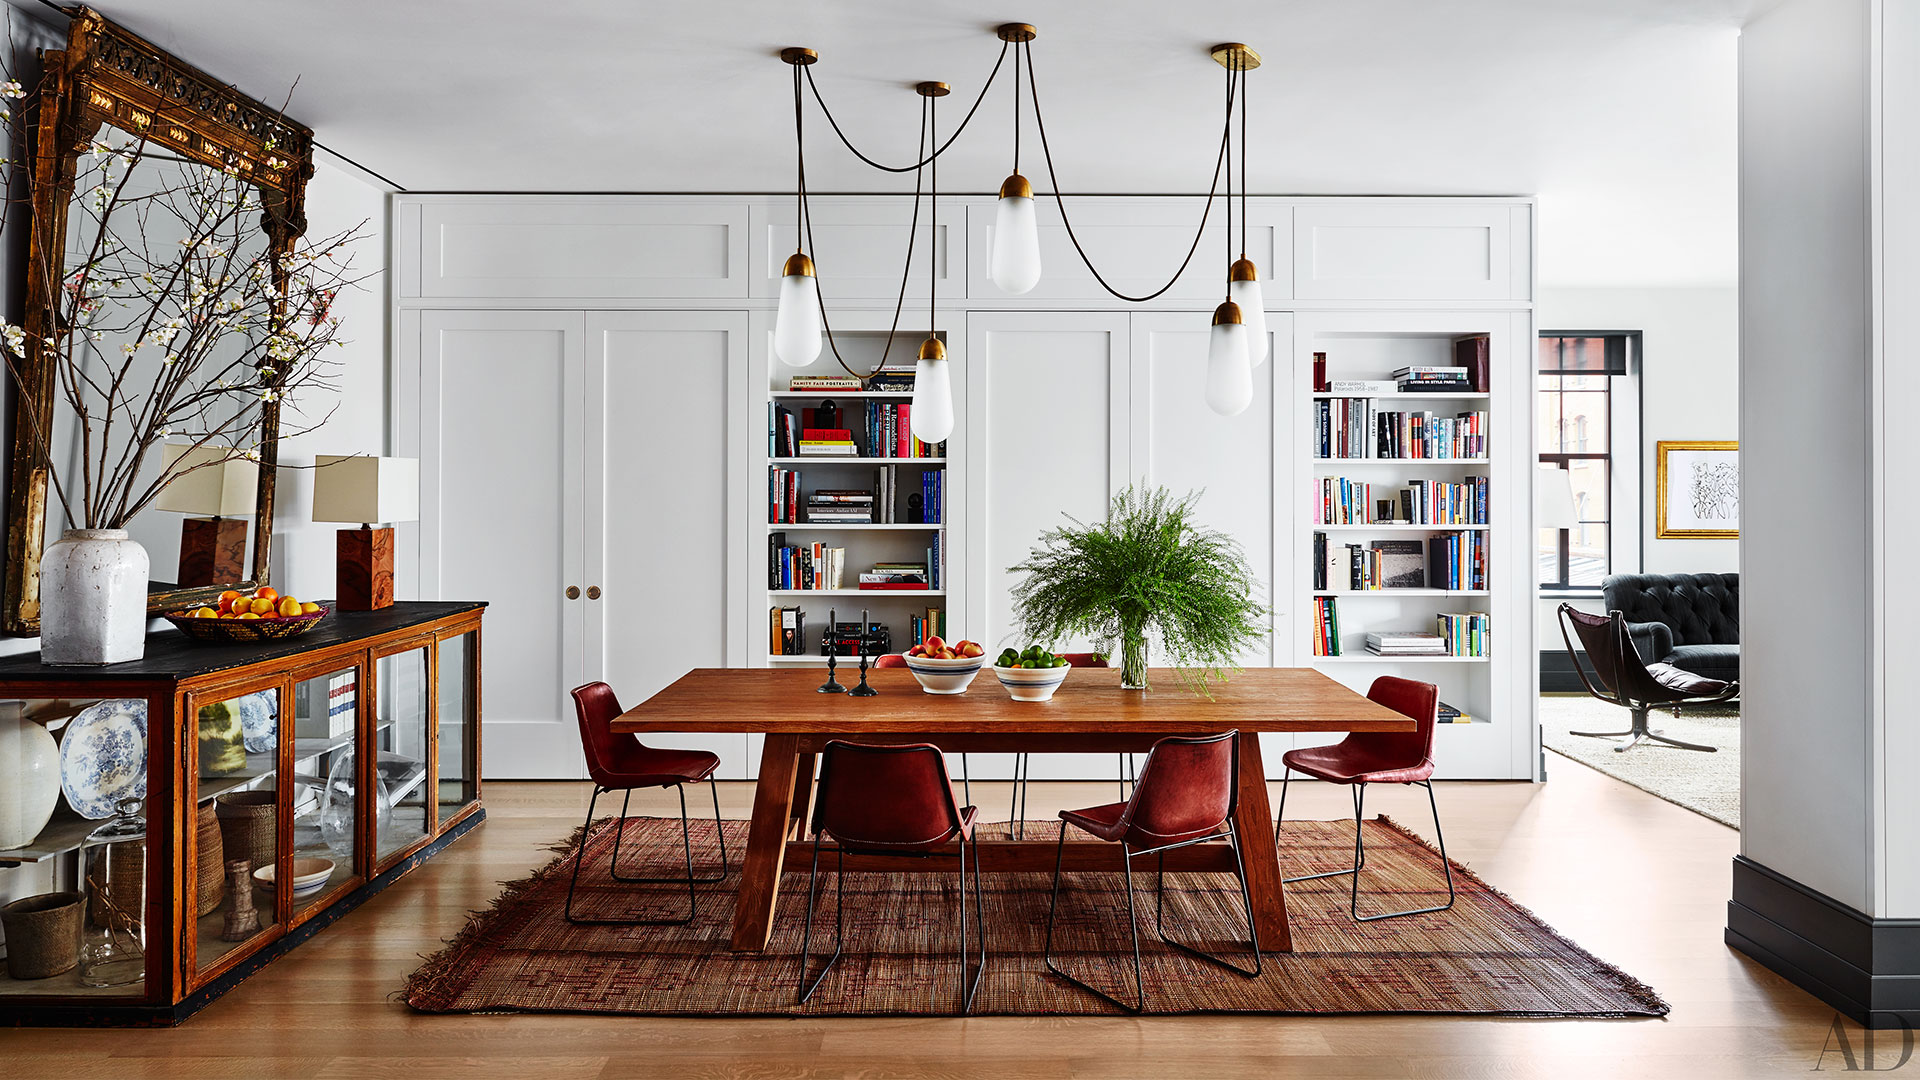 Make Your Dinnertime 10 Times Better with These Dining Room Chandeliers 7